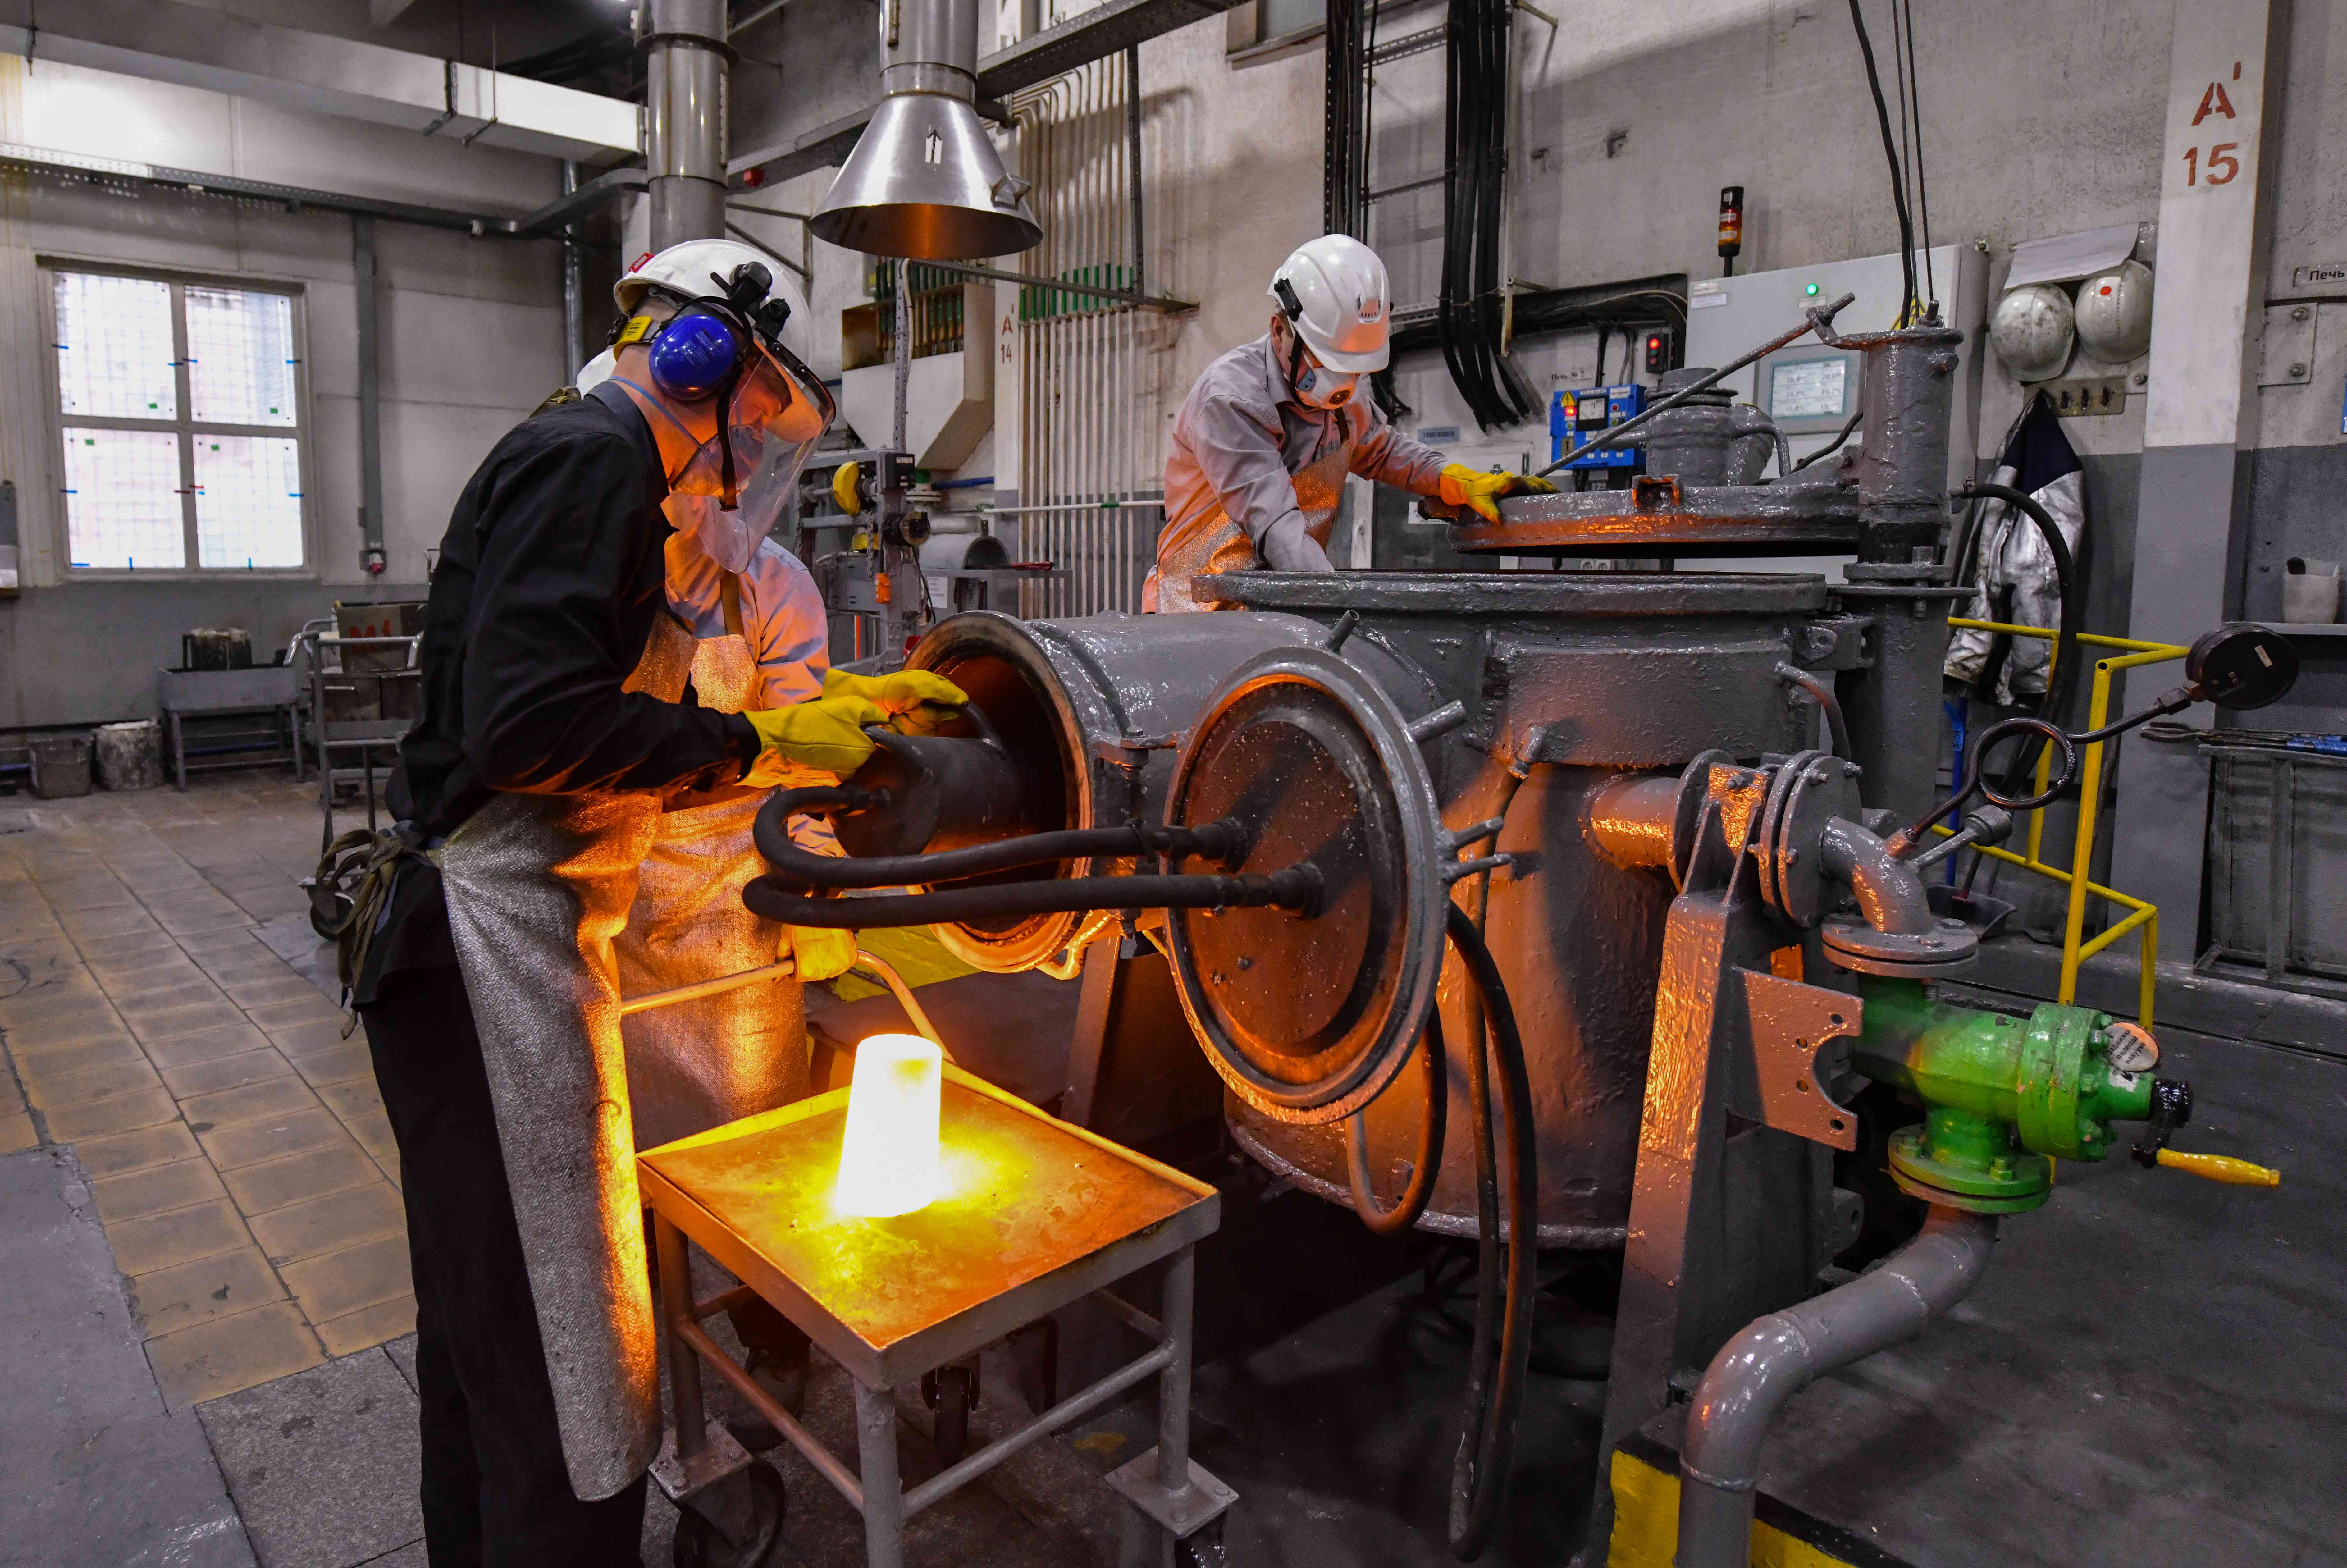 Workers in a factory crafting platinum